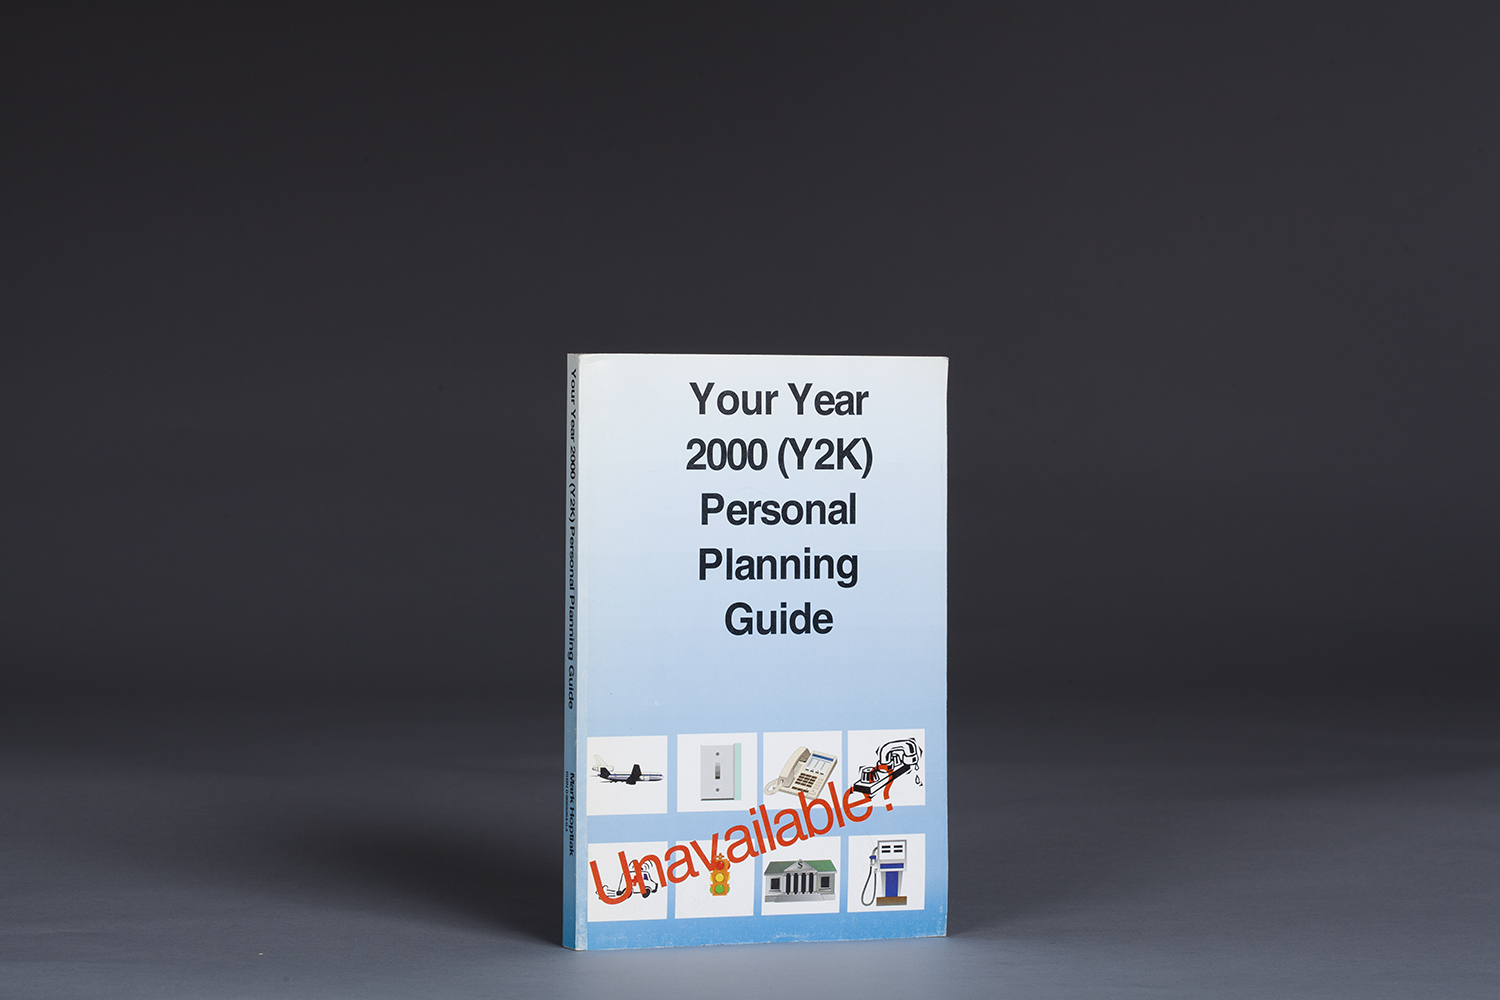 Your Year 2000 (Y2K) Personal Planning Guide - 9831 Cover.jpg